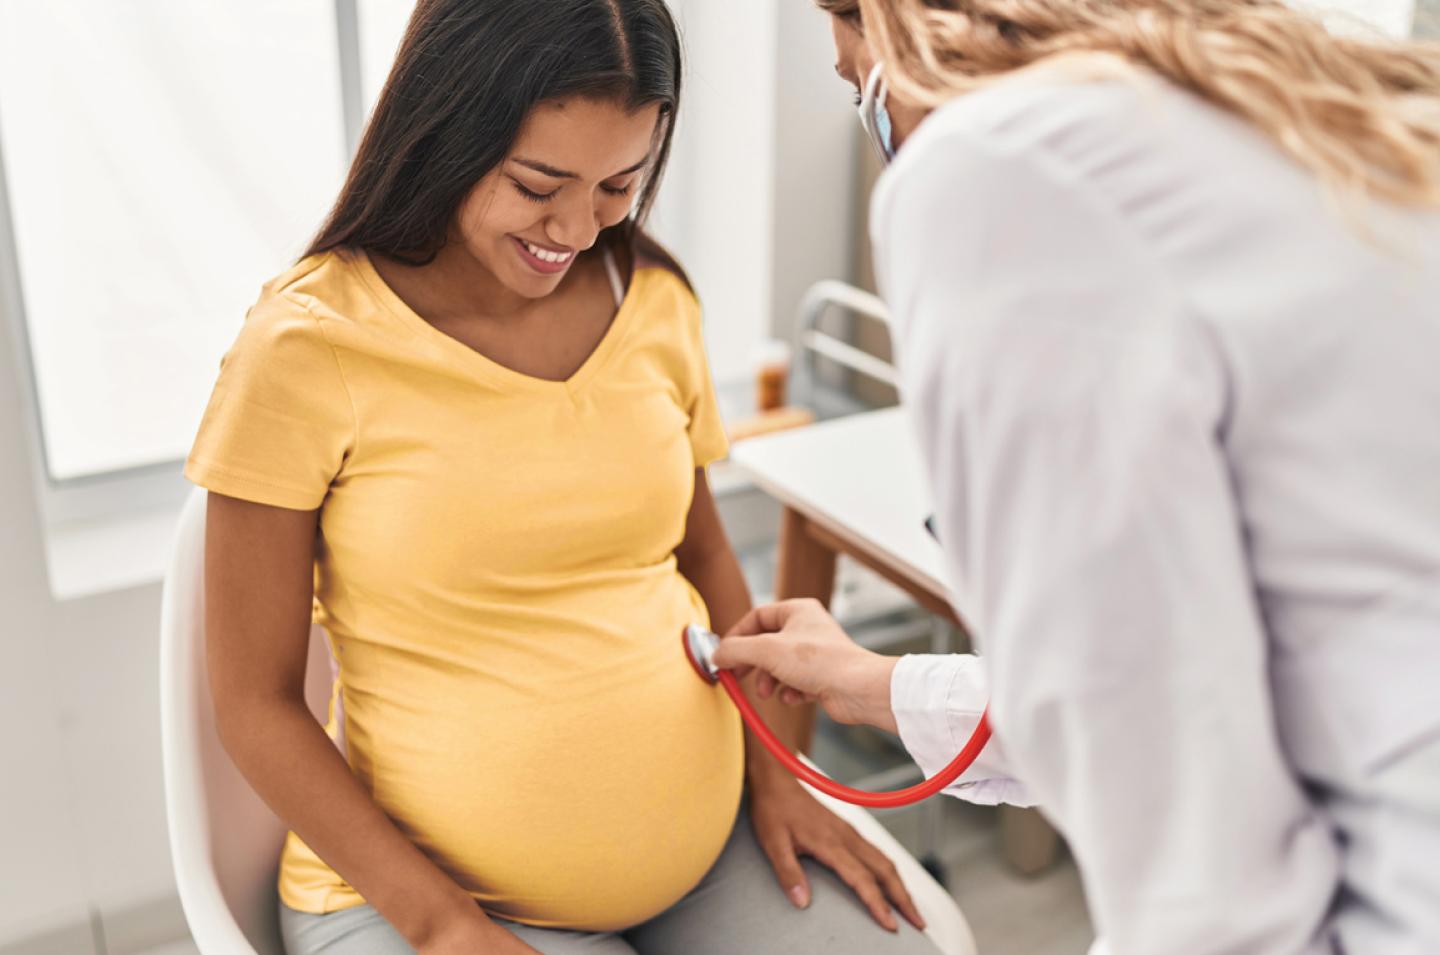 Pregnant woman being examined by doctor